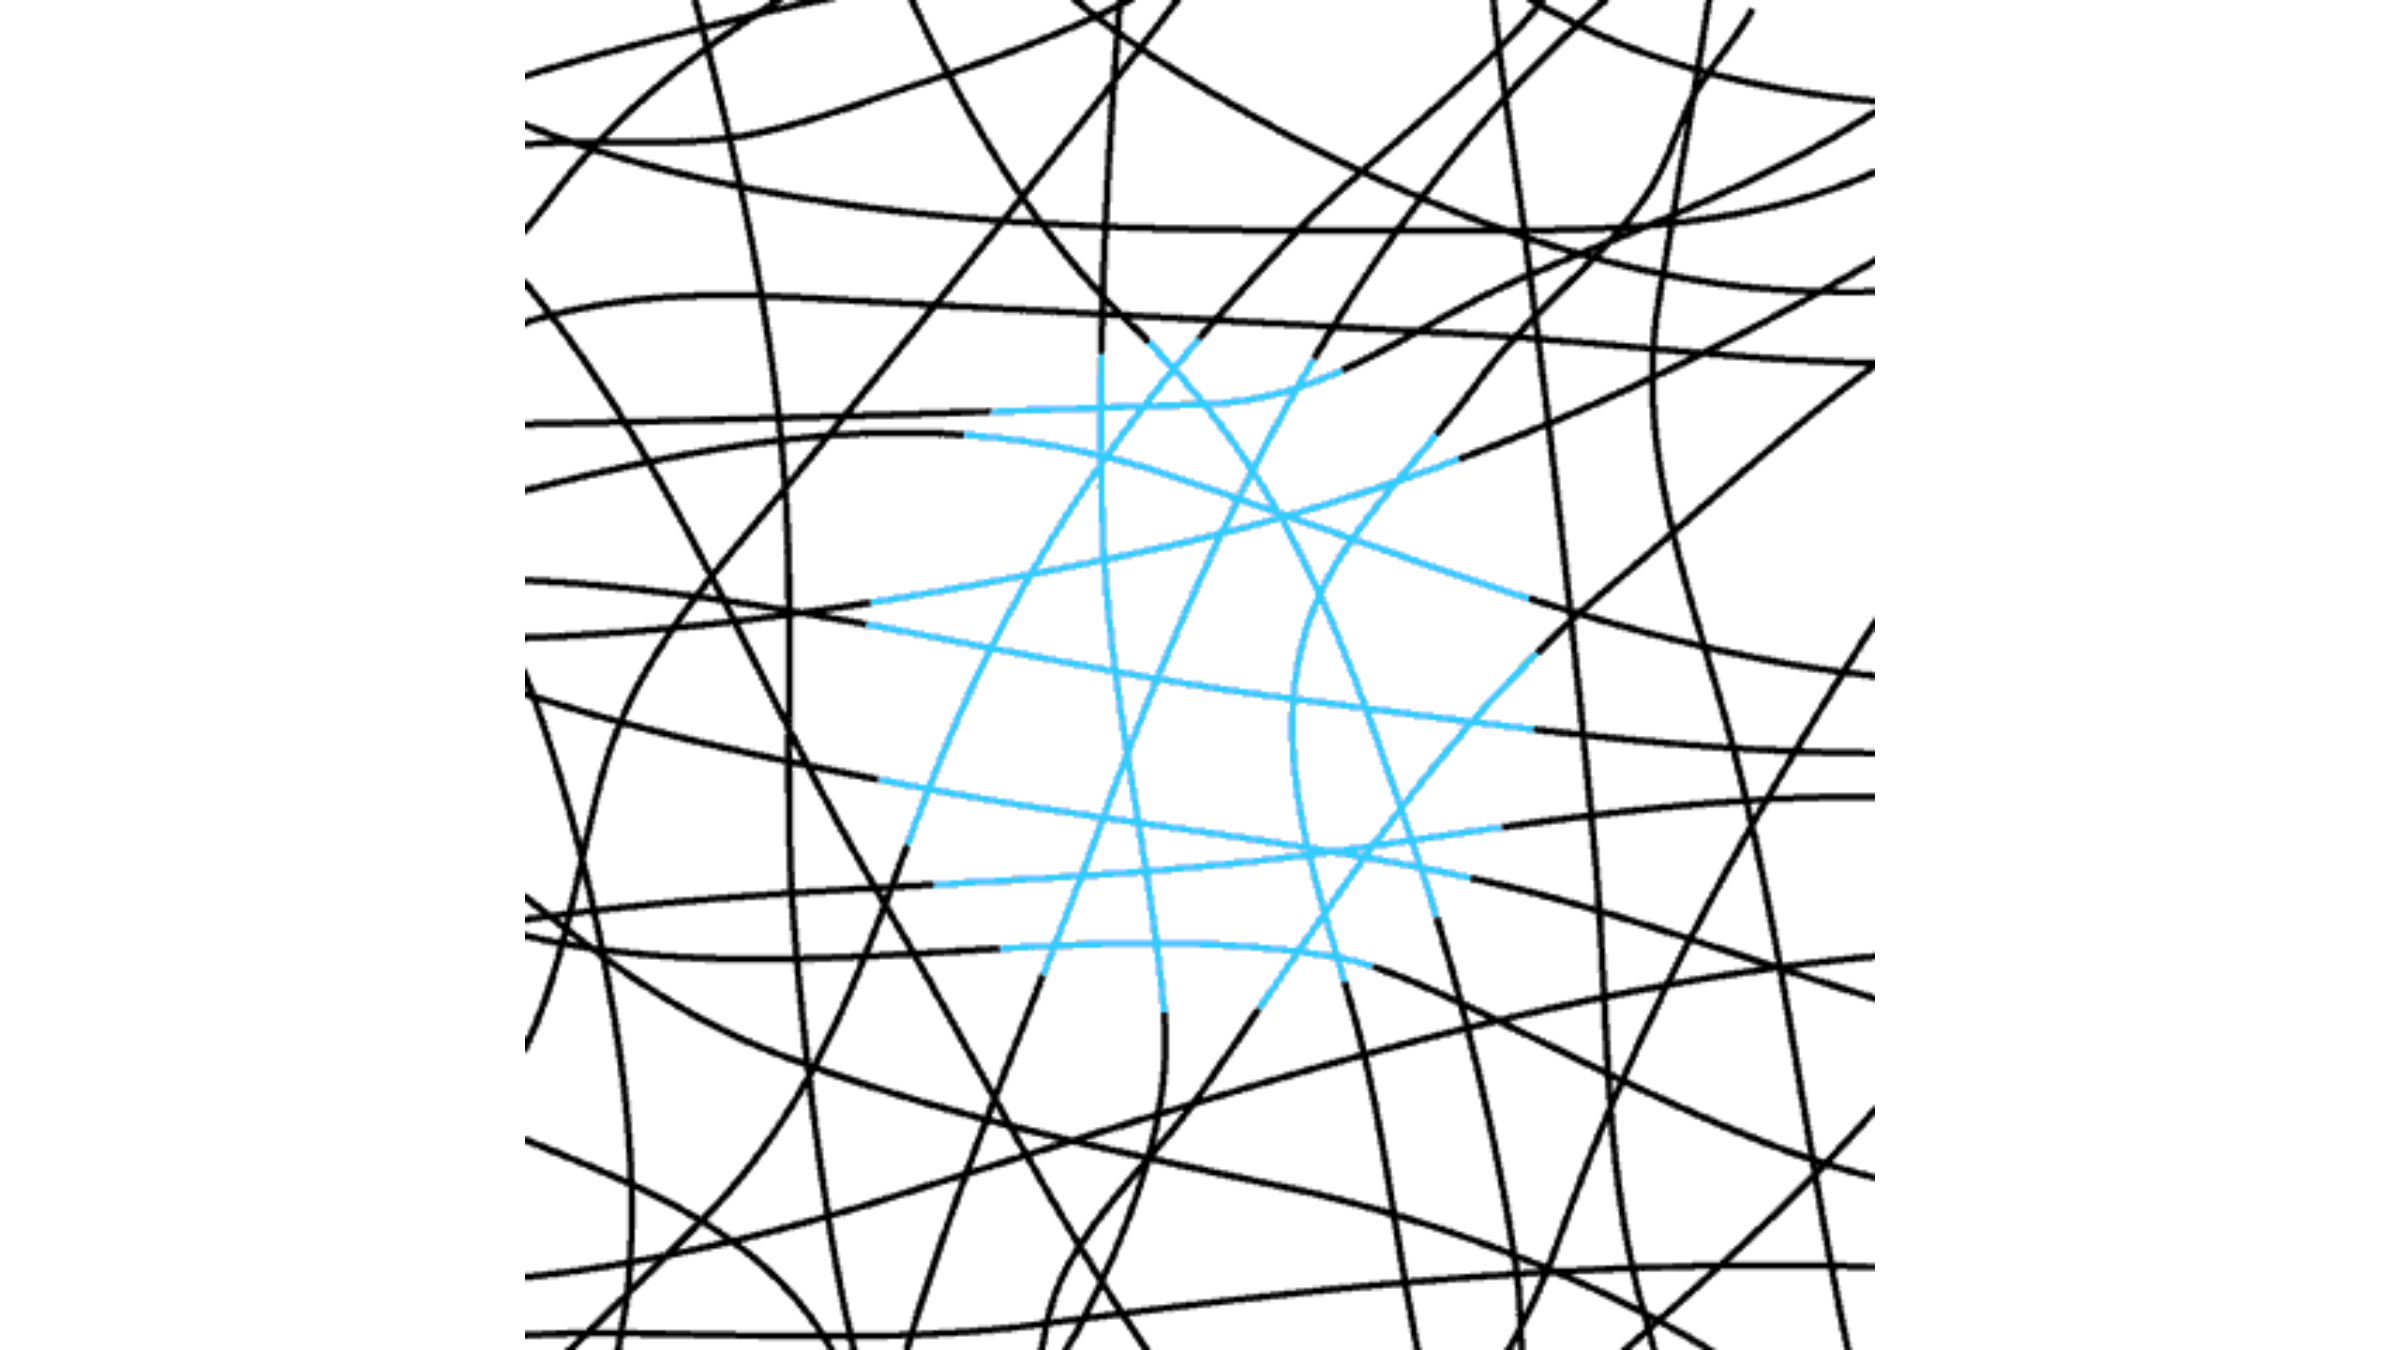 An example of the neon color spreading illusion. Lots of haphazard black lines appear against a white background. In the centre of the image is a blue patch in the shape of a circle.